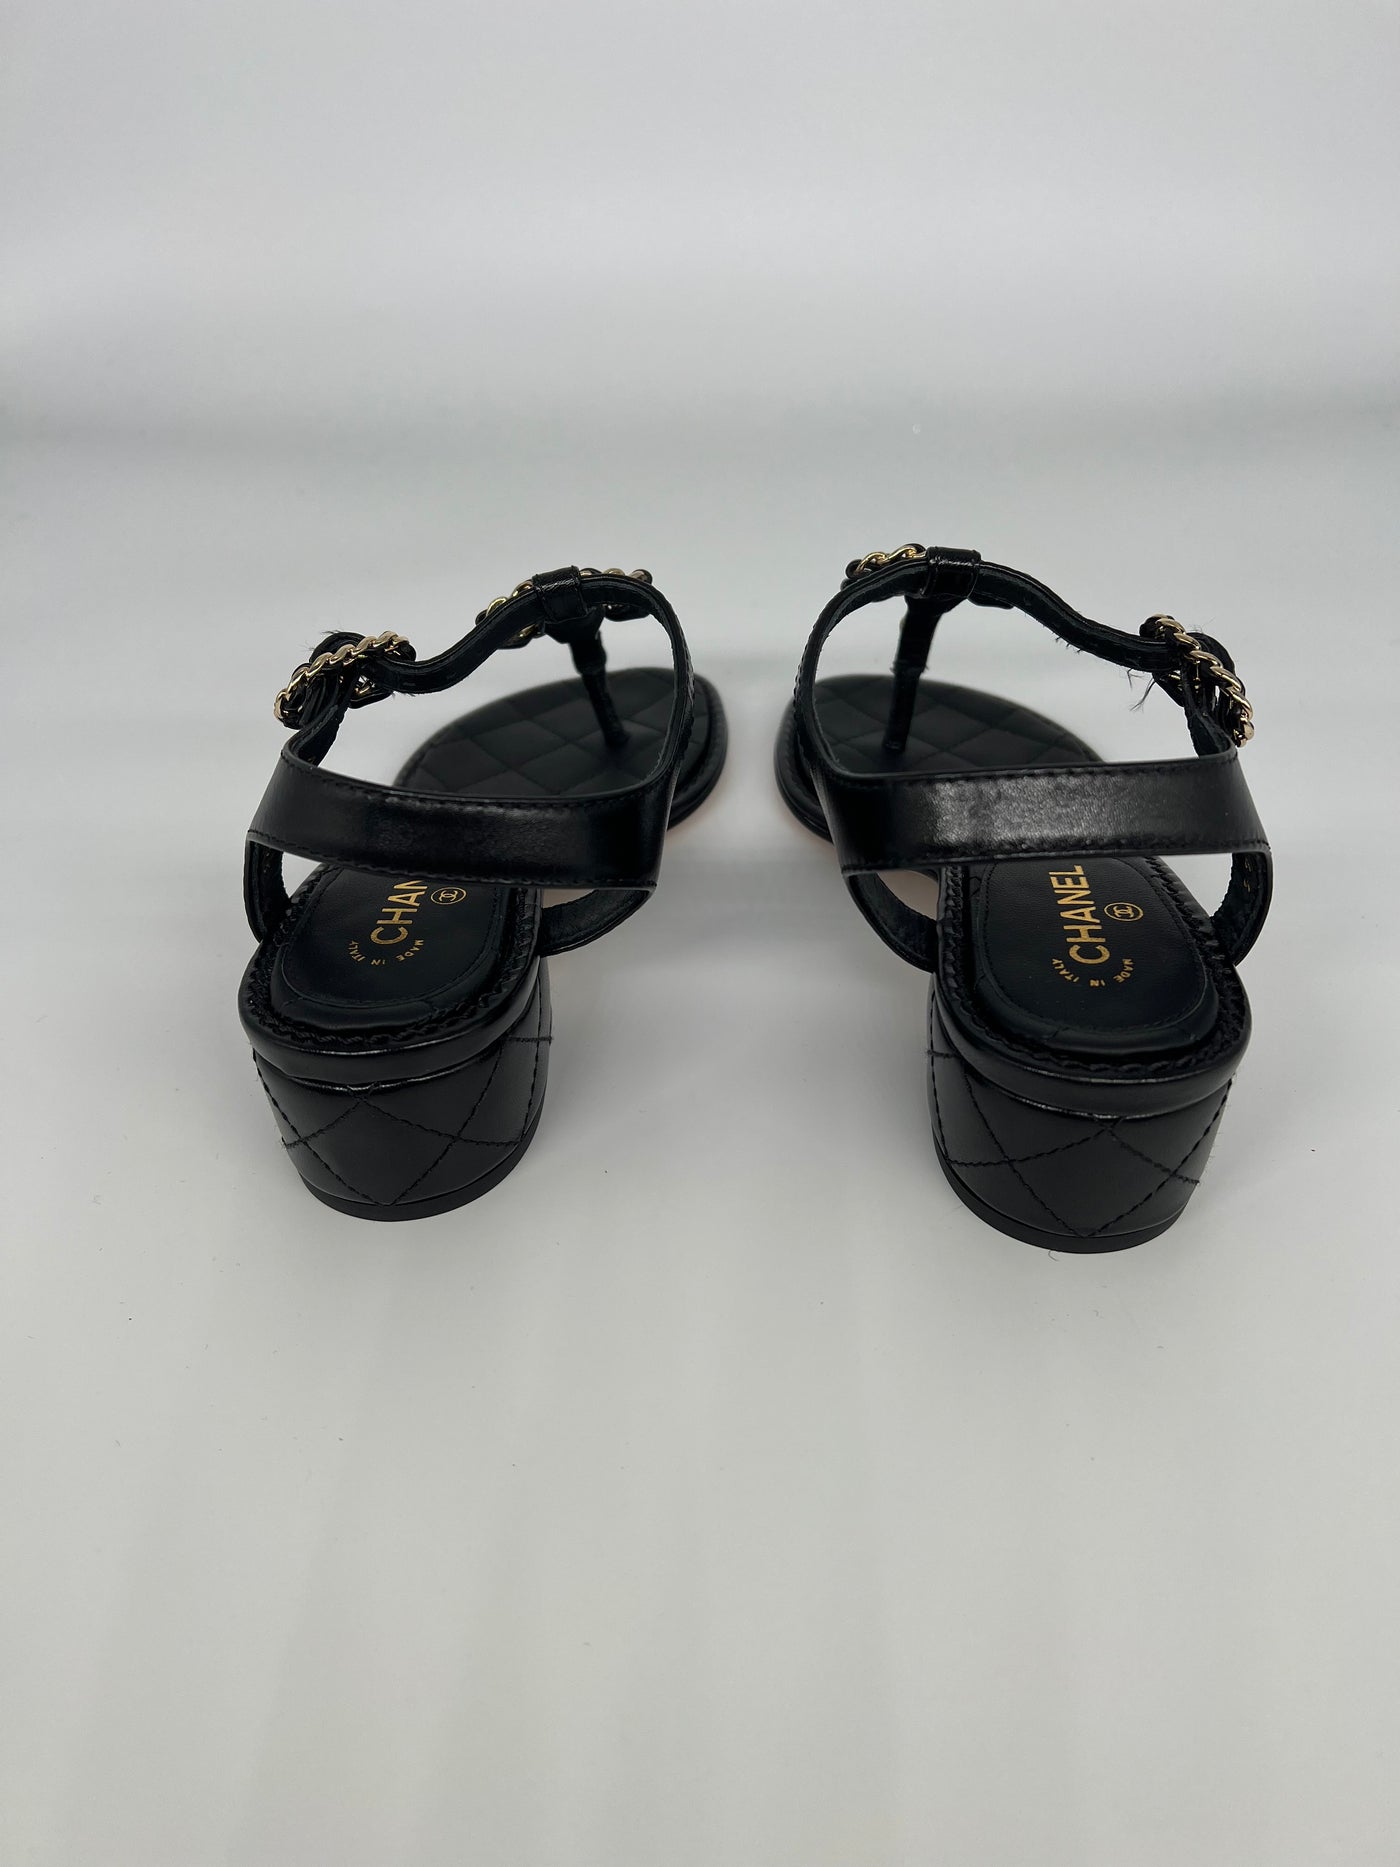 Chanel Black/Gold Chain Sandals - Size 34.5 - SOLD